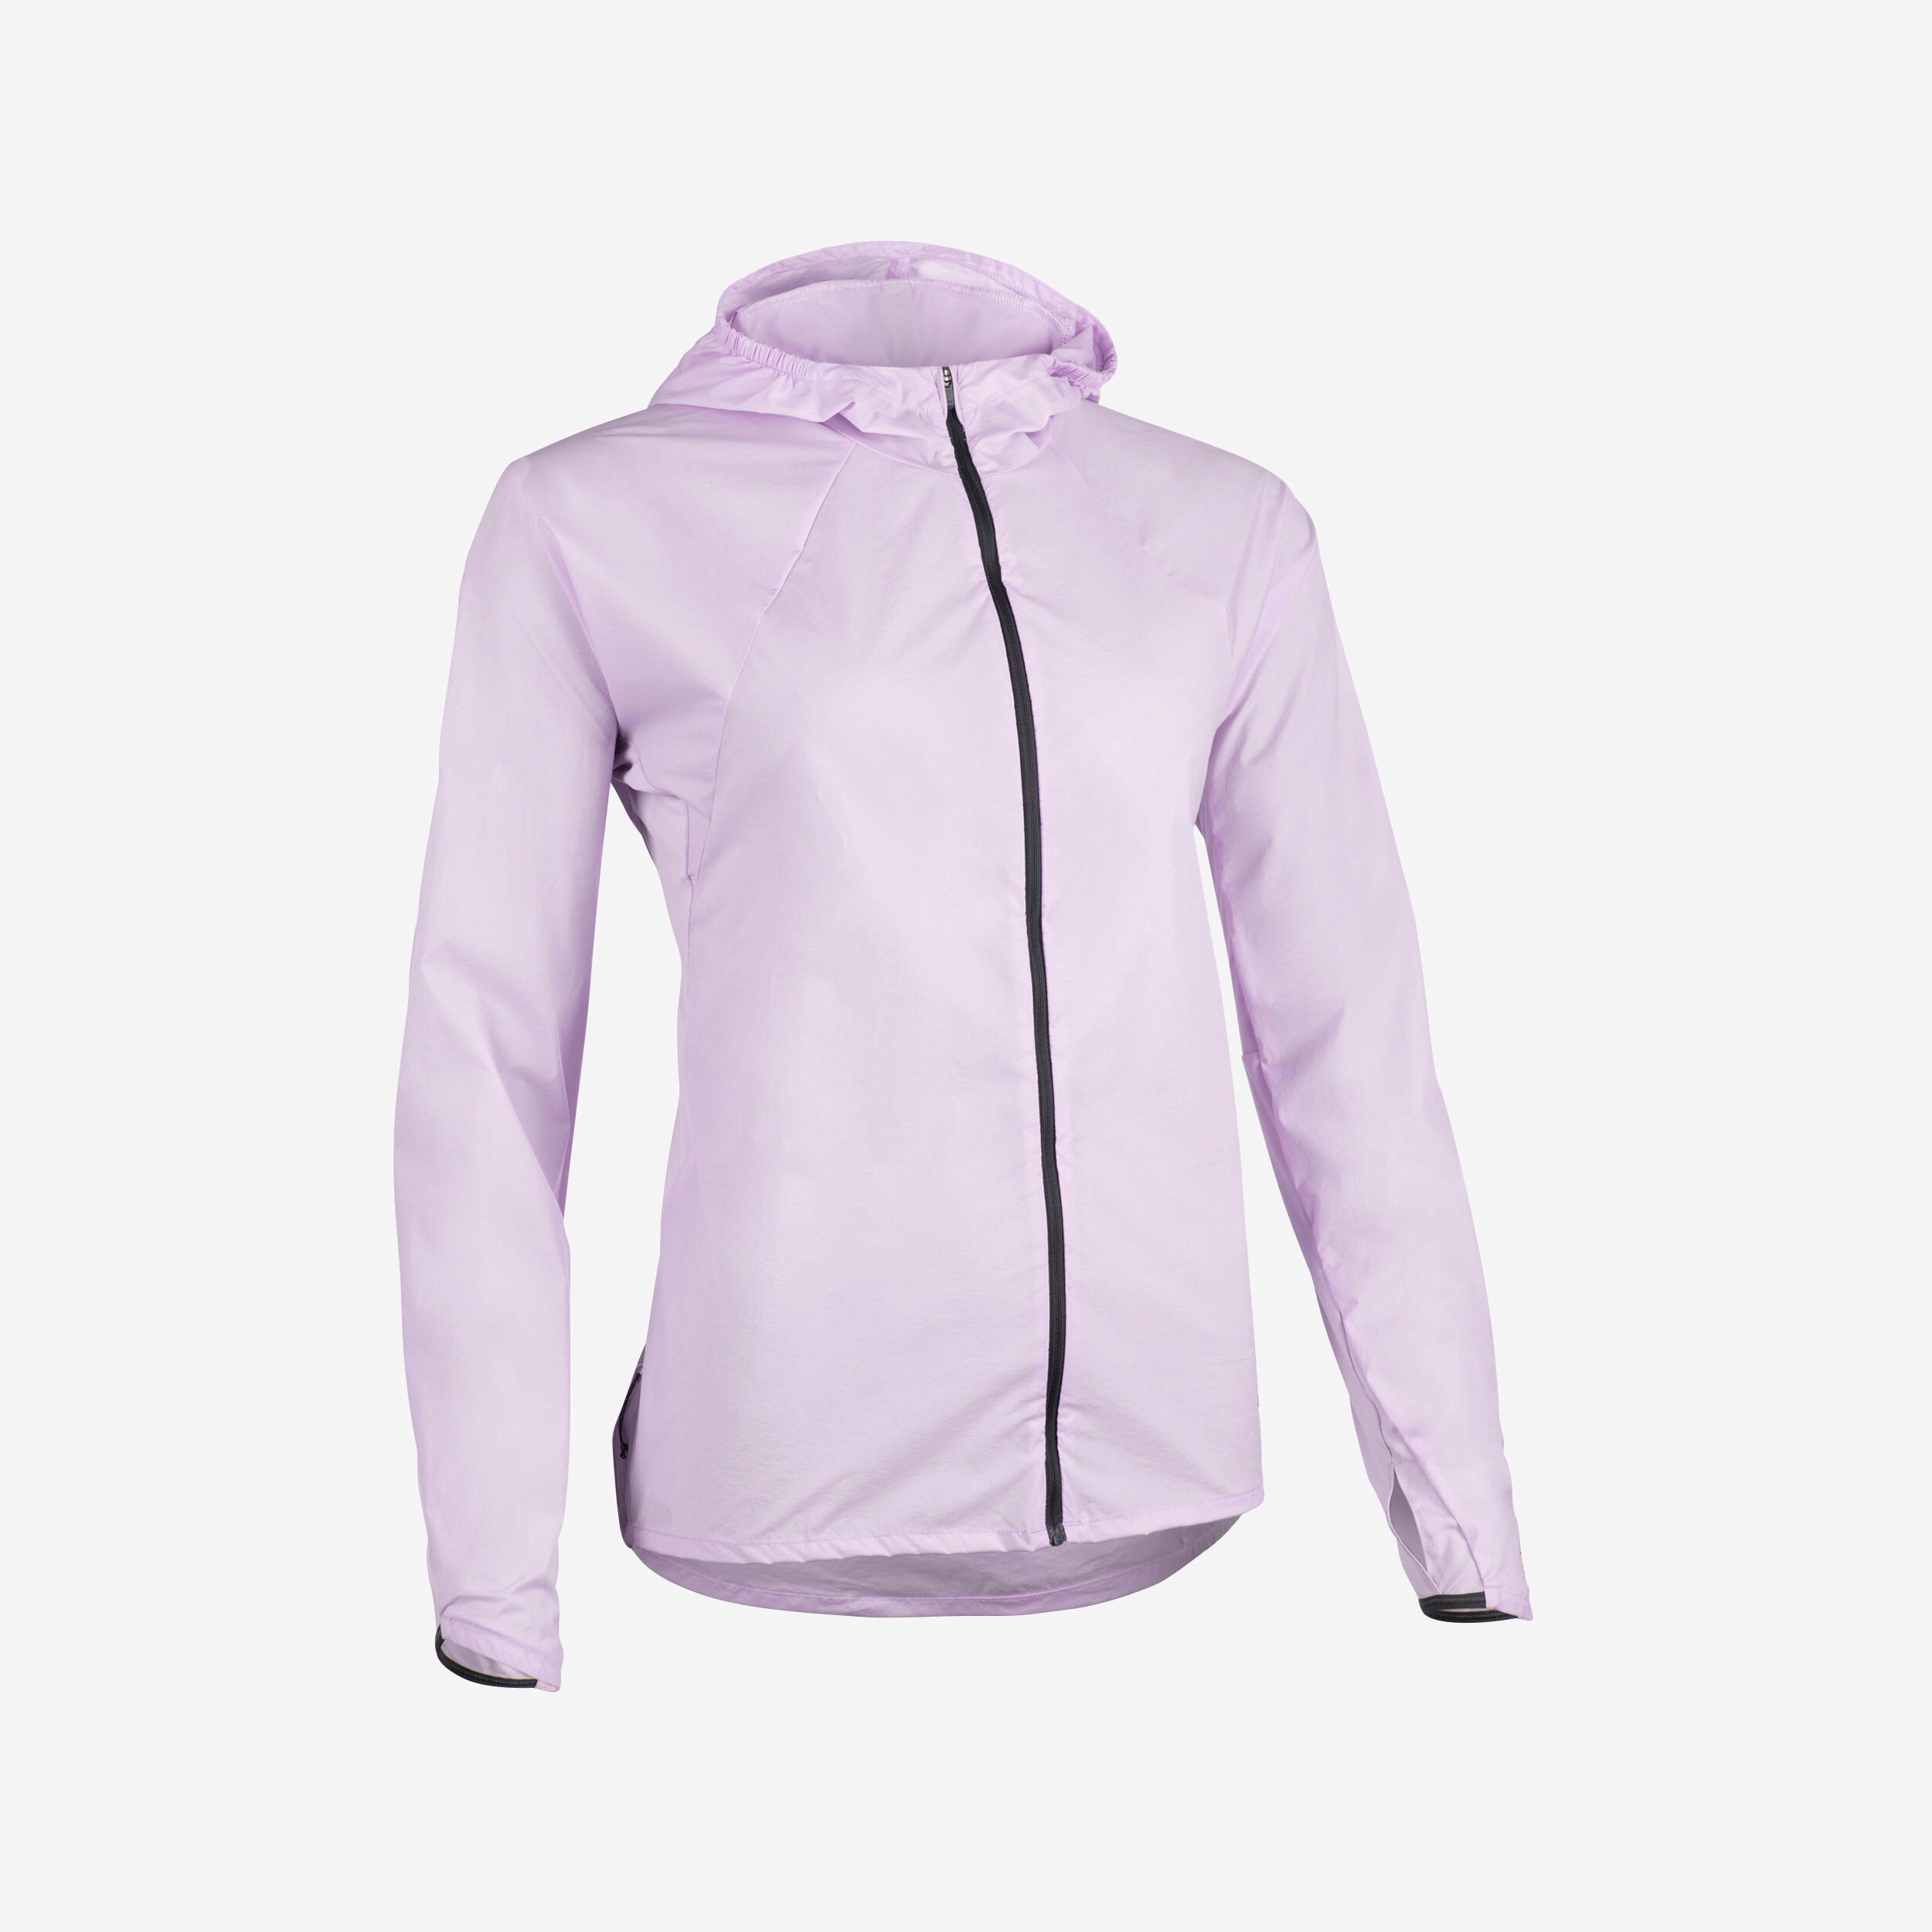 WOMEN'S TRAIL RUNNING LONG-SLEEVED WINDPROOF JACKET - LILAC 1/10